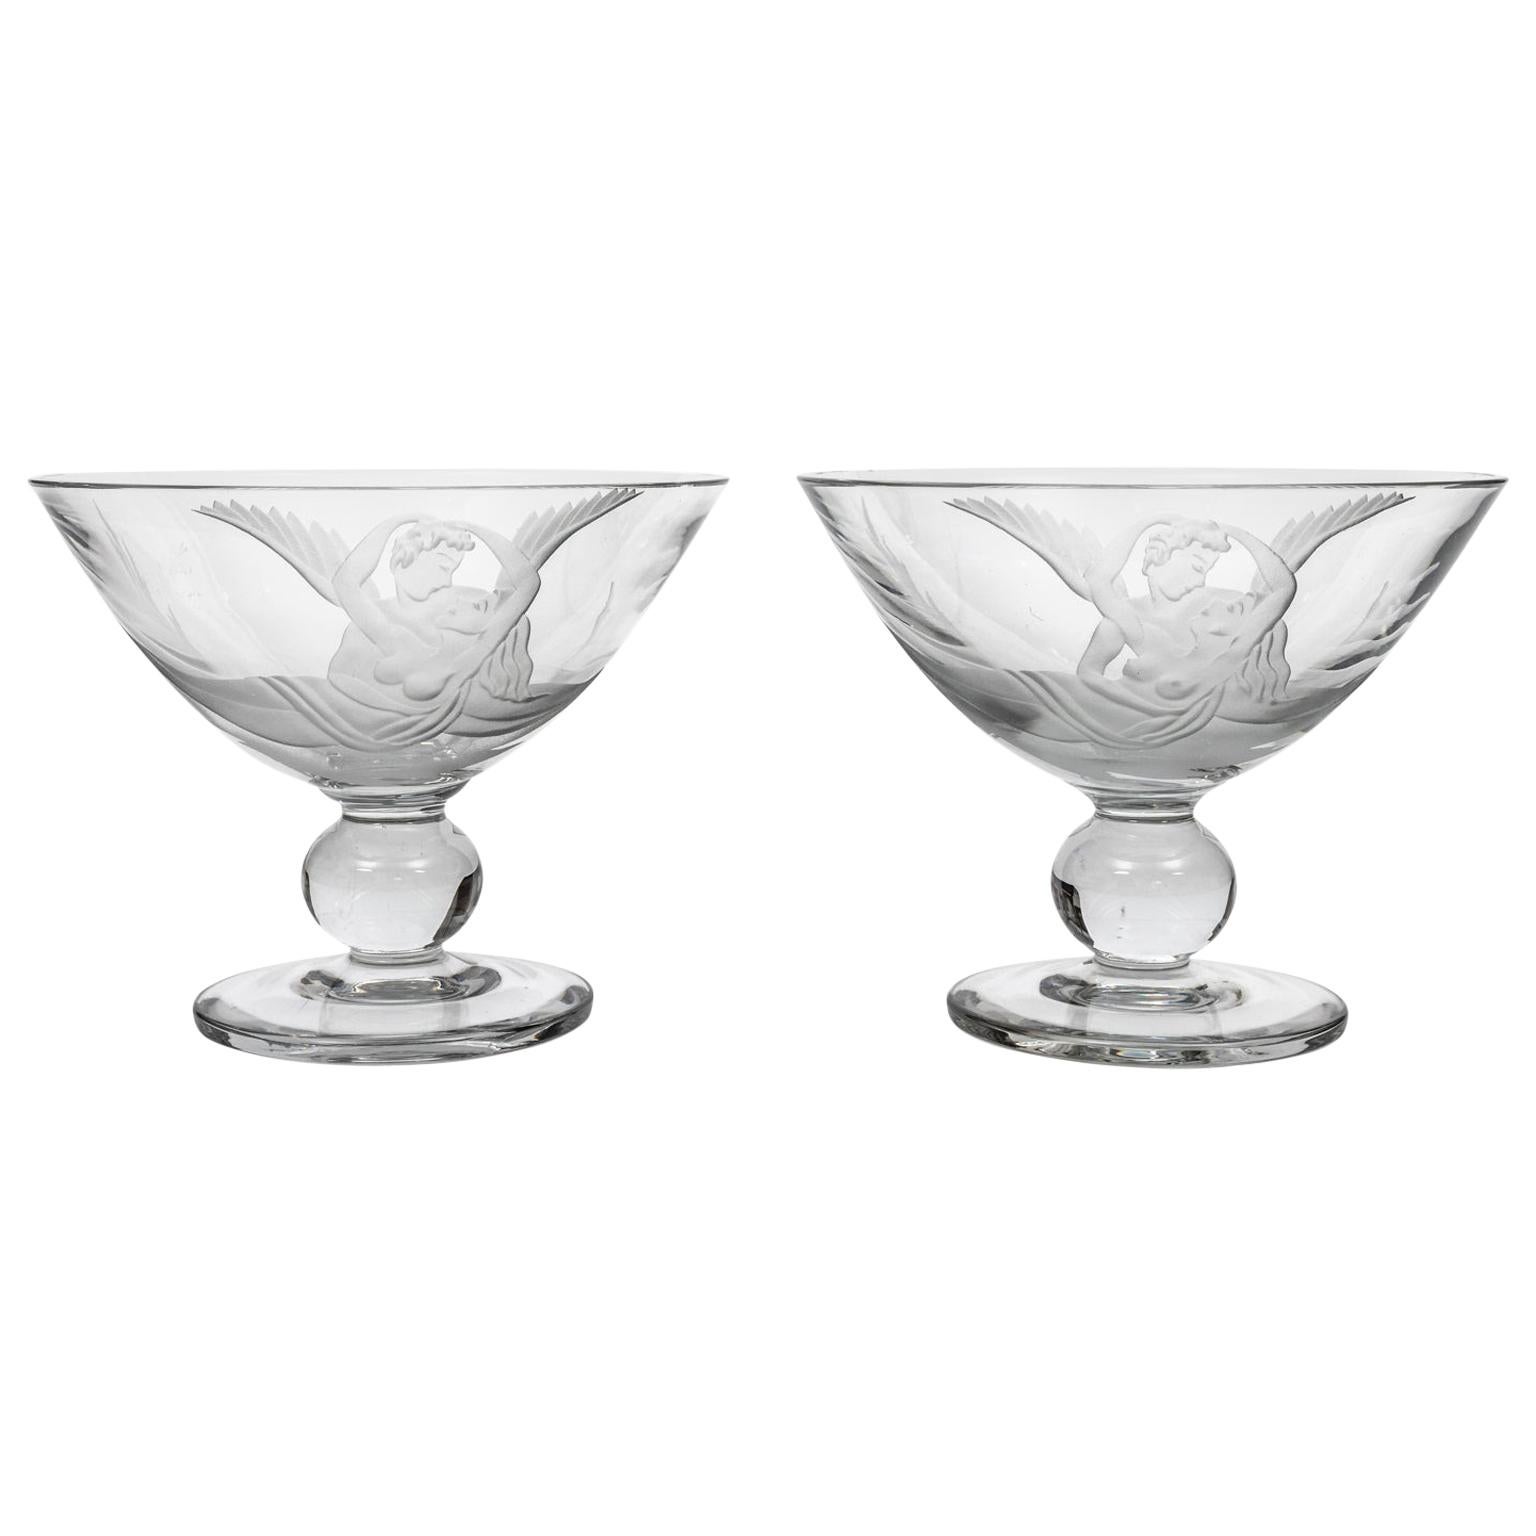 Pair of Dorothy Thorpe Art Deco Compotes For Sale